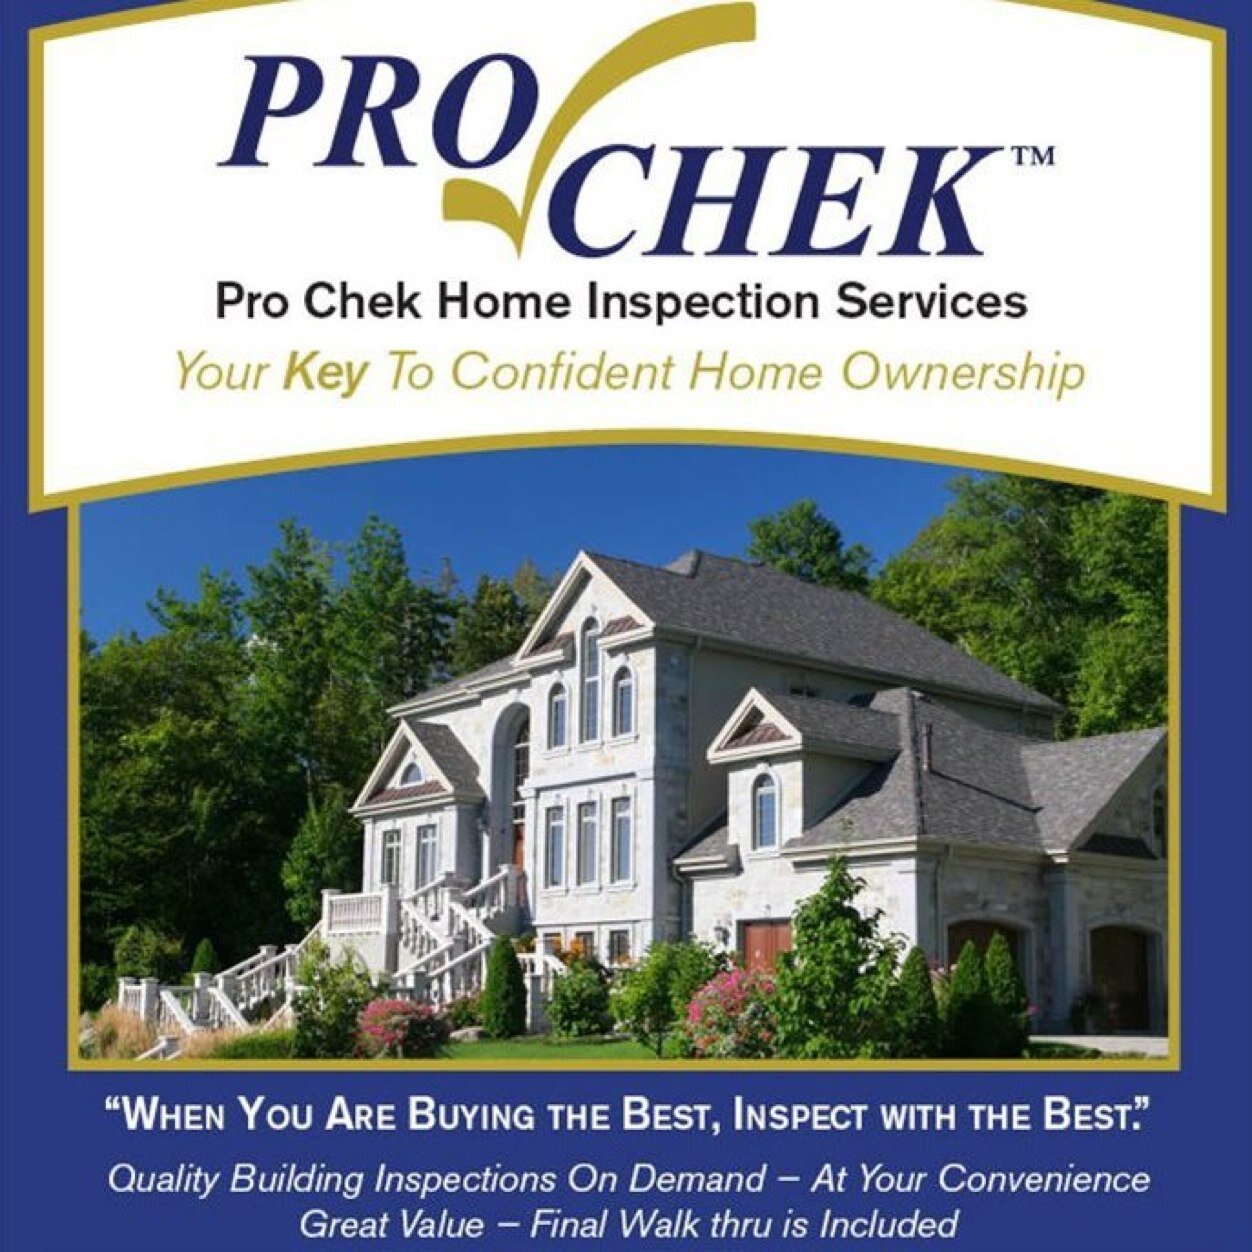 Home Inspections, Septic, Radon and Water Testing! Blower Door Testing and Gas Fireplace Service! Covering all of CT and lower NY.